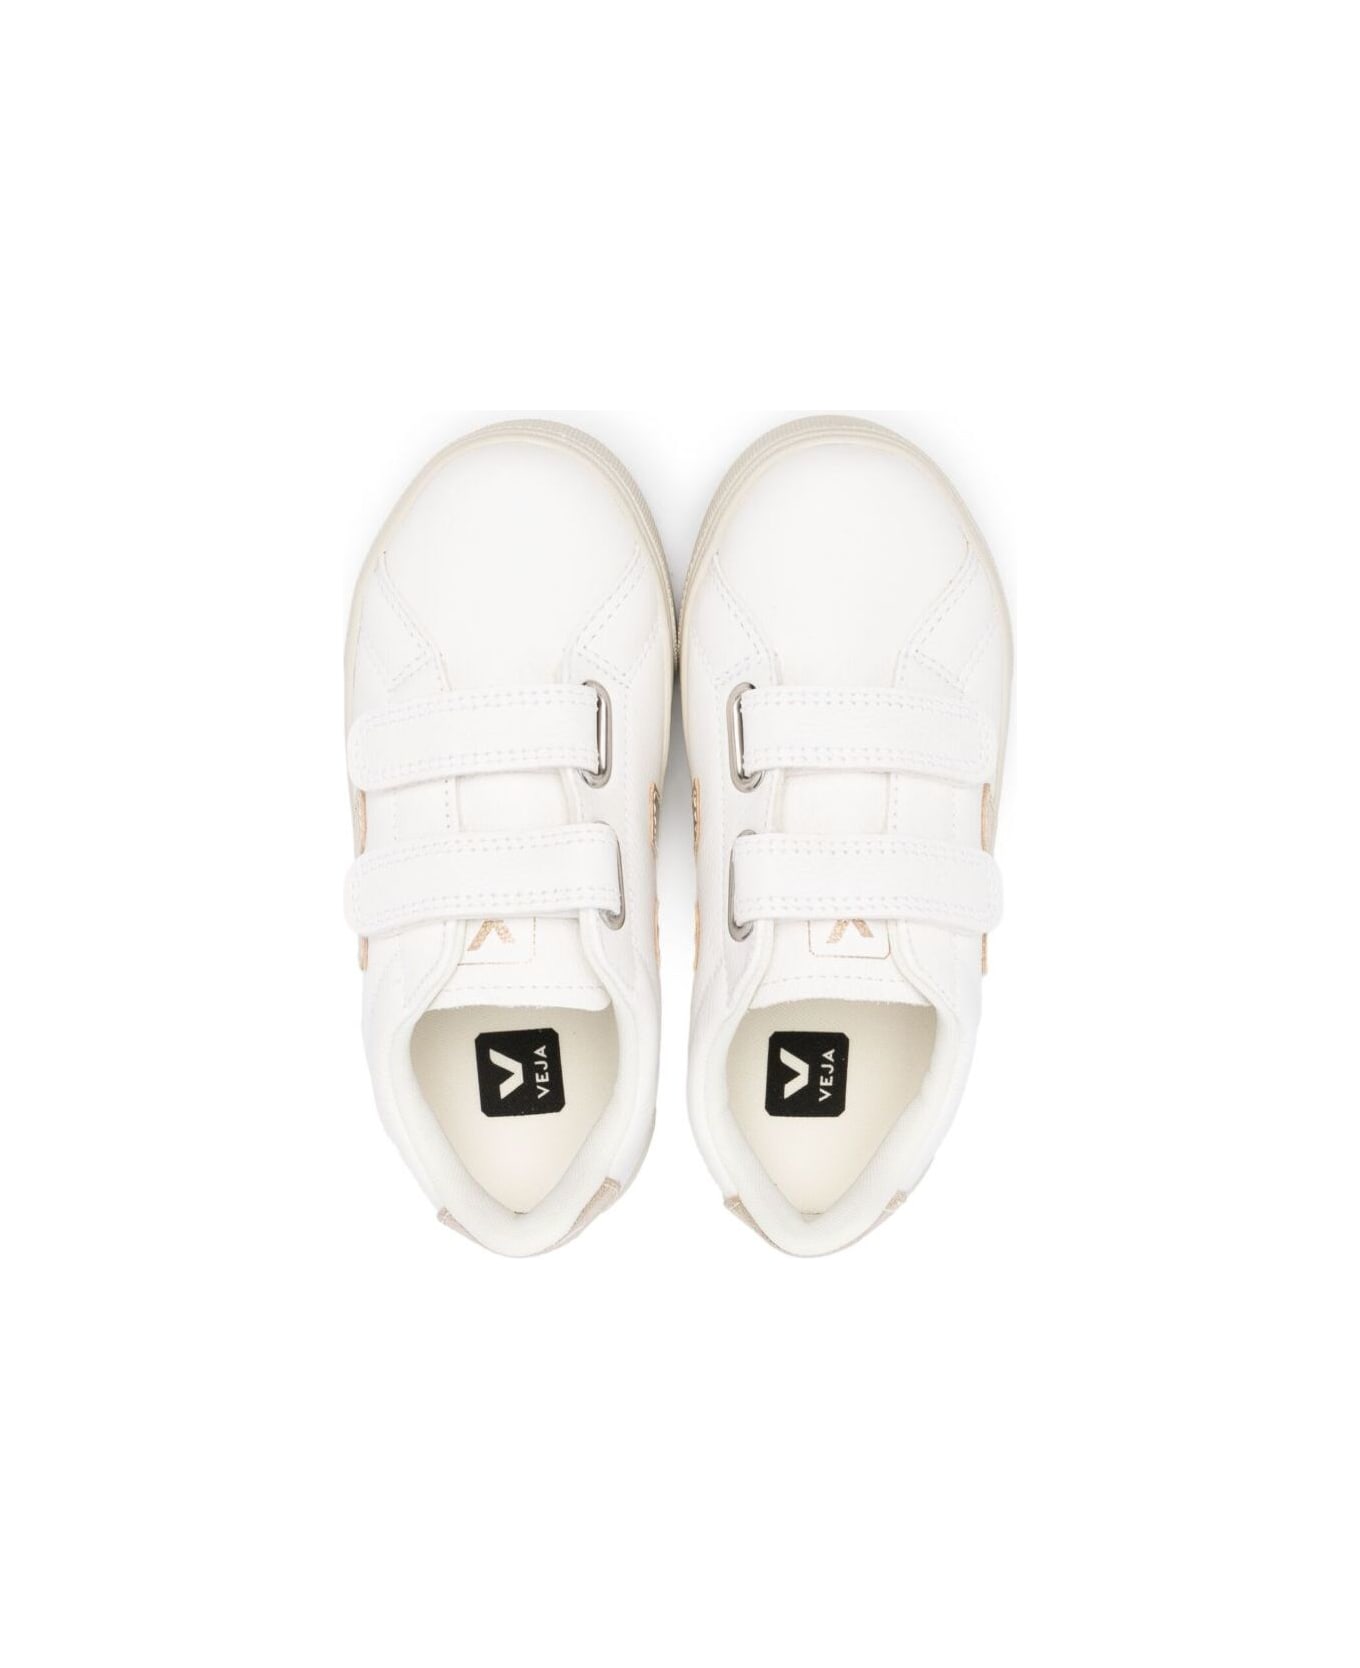 Veja White Sneaker With Platinum Logo And Heel Tab In Leather Girl - White